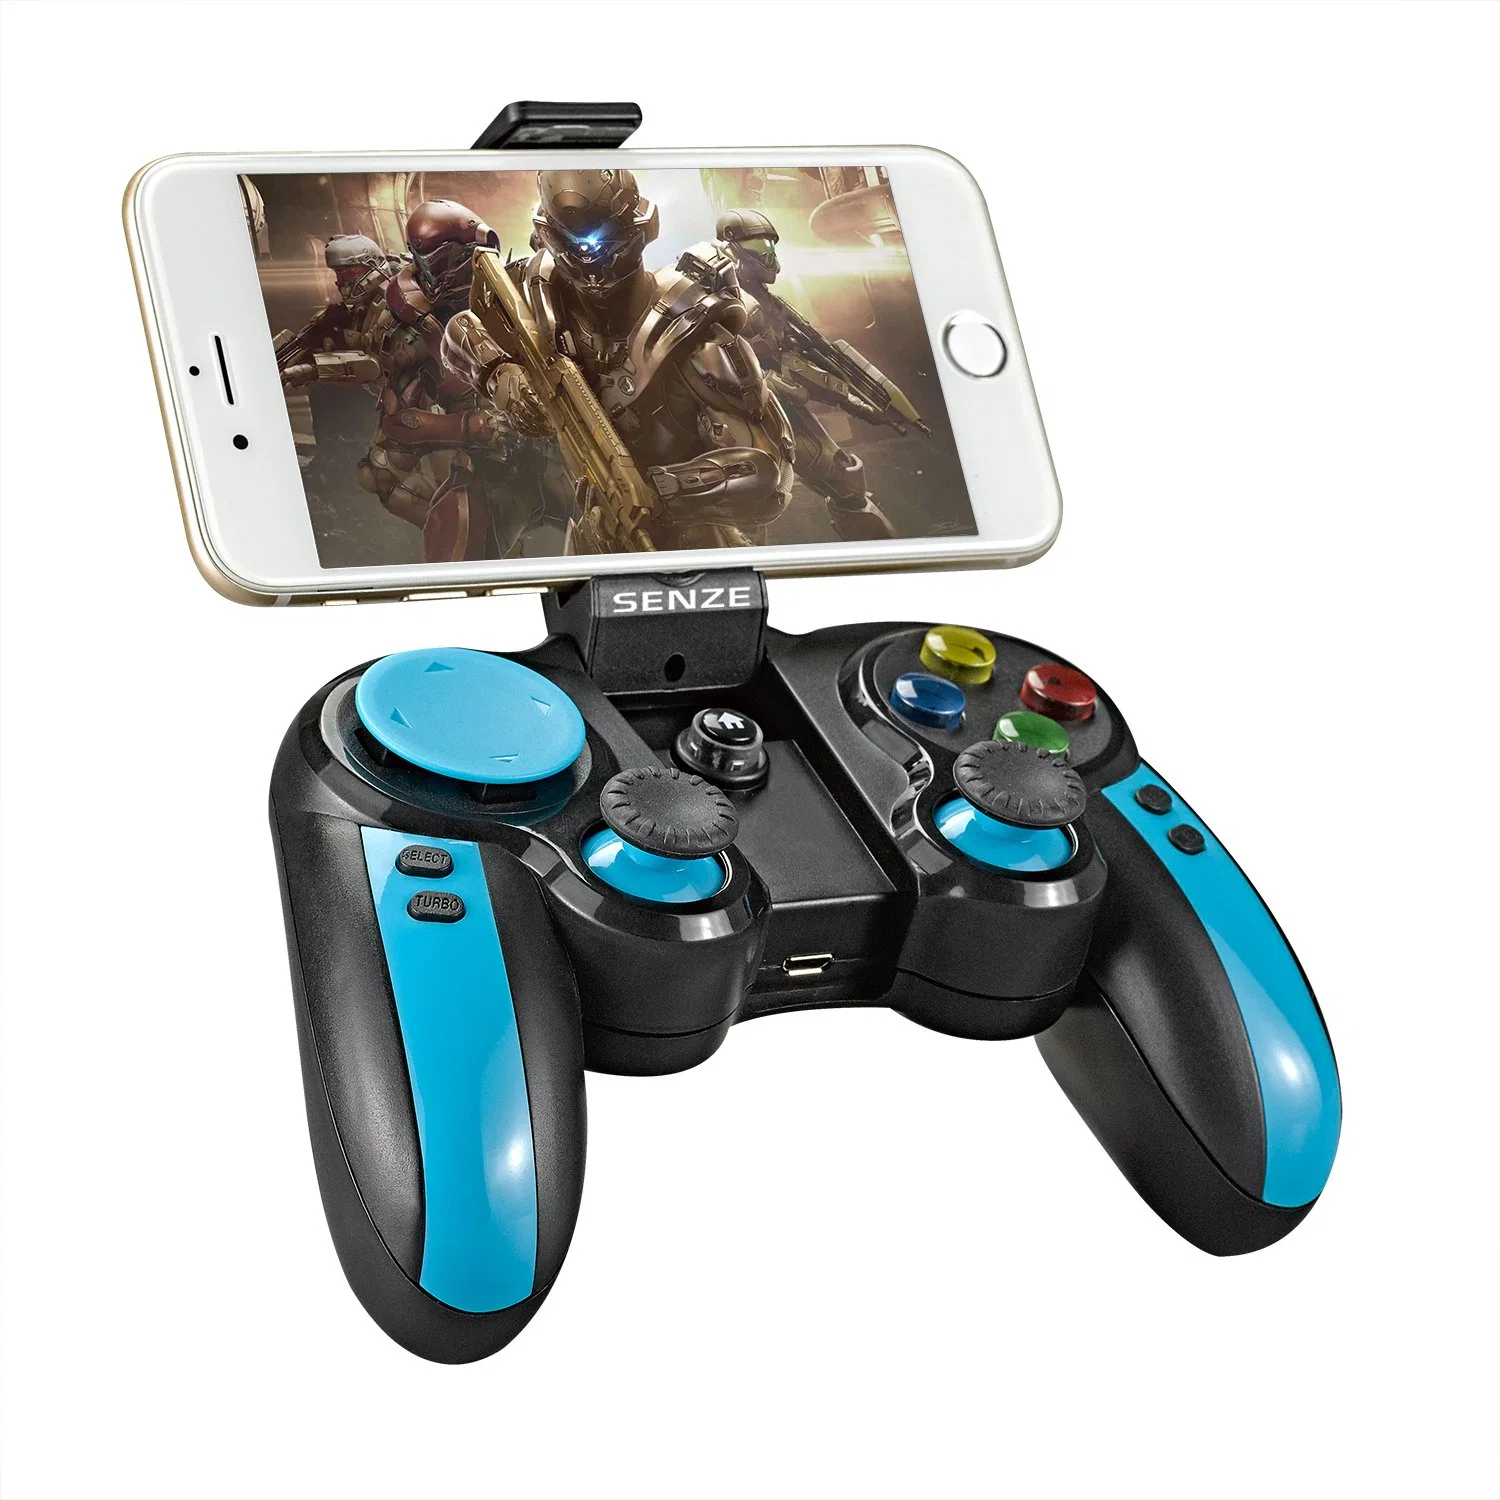 Senze Android/Ios Game Console for Smart TV, iPad, Mobile Phone